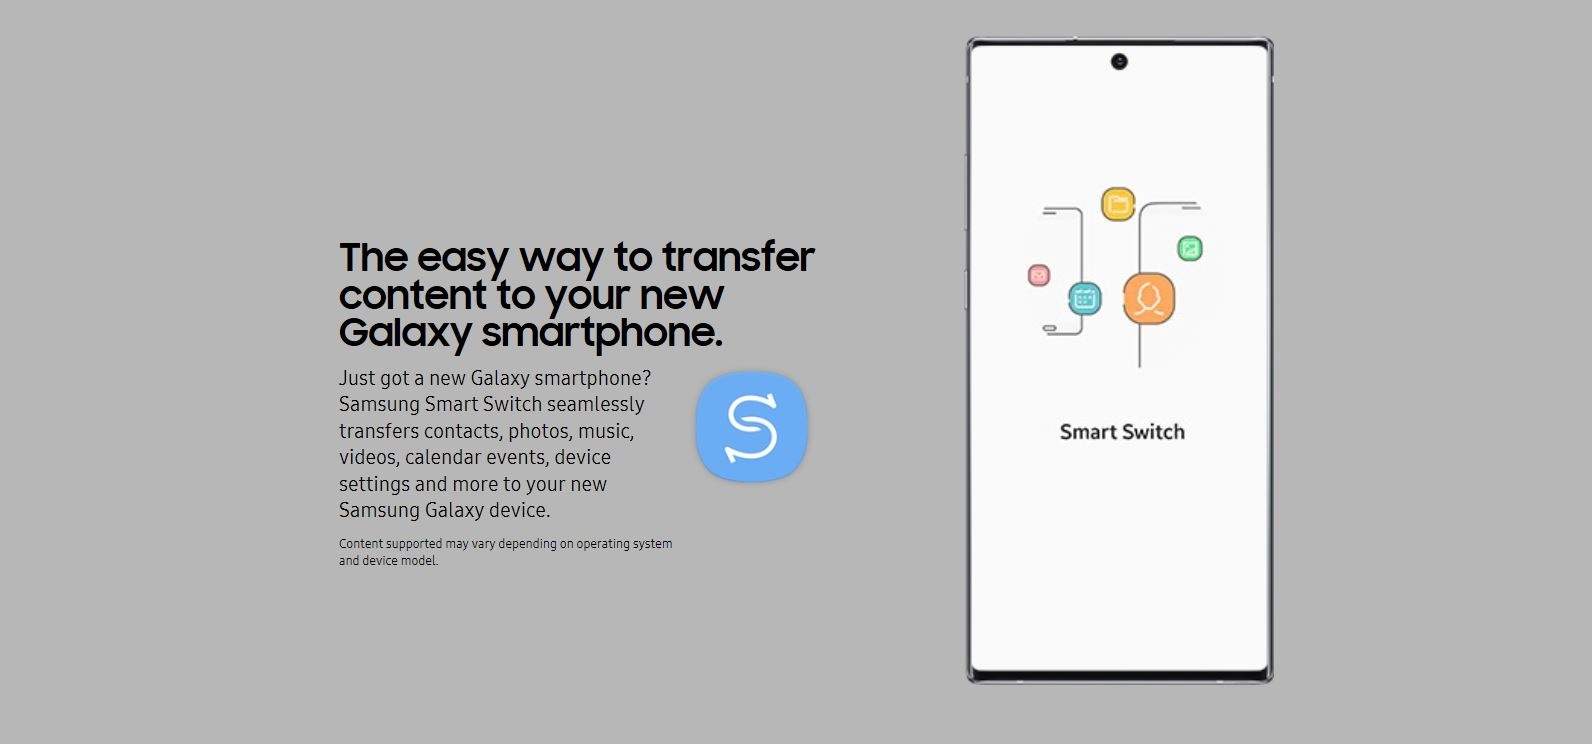 The easy way to transfer content to your new Galaxy phone